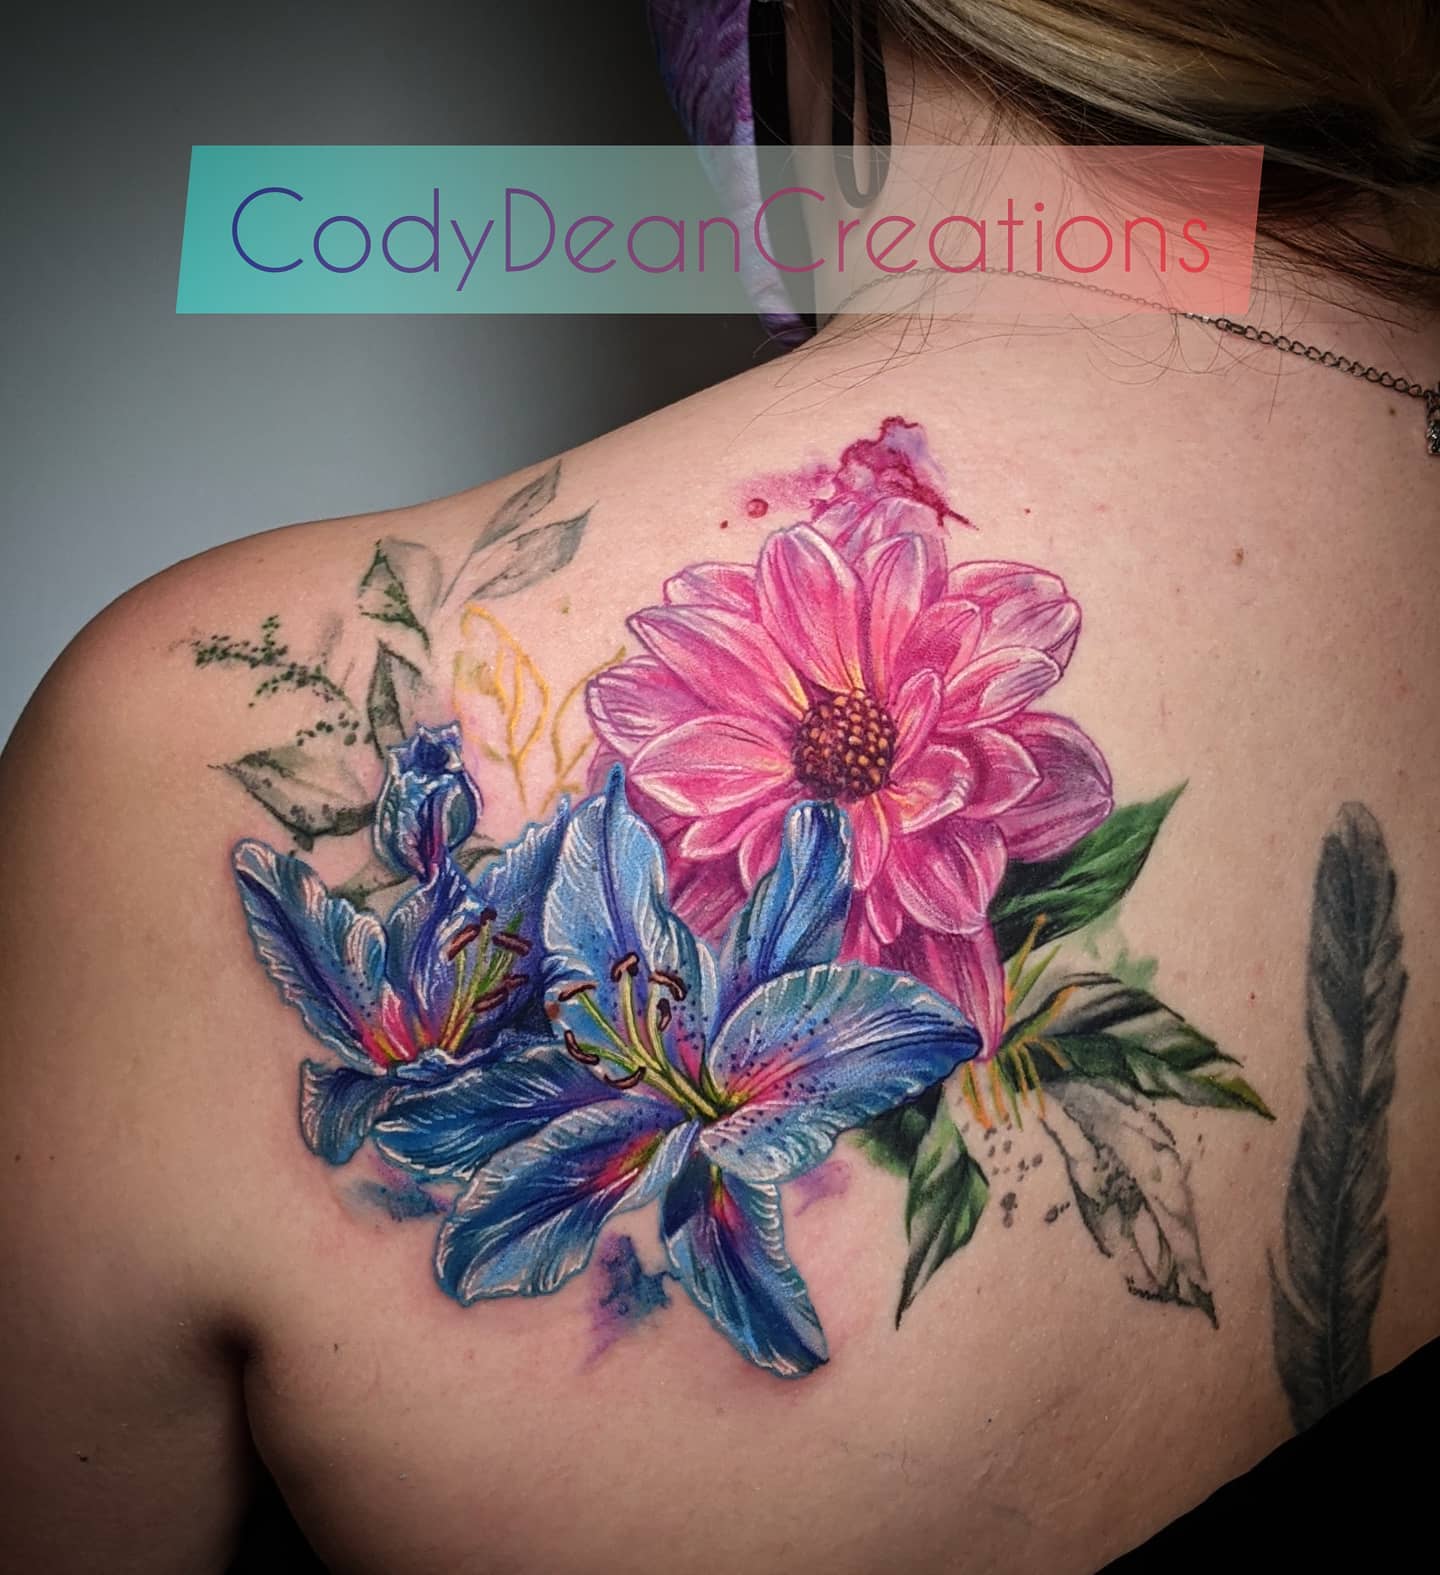 To have fun with your back, here is a great tattoo for you. The pink and blue lilies are so beautiful and they remind a garden full of flowers. It's great that they also look like something more abstract, like a piece of art!